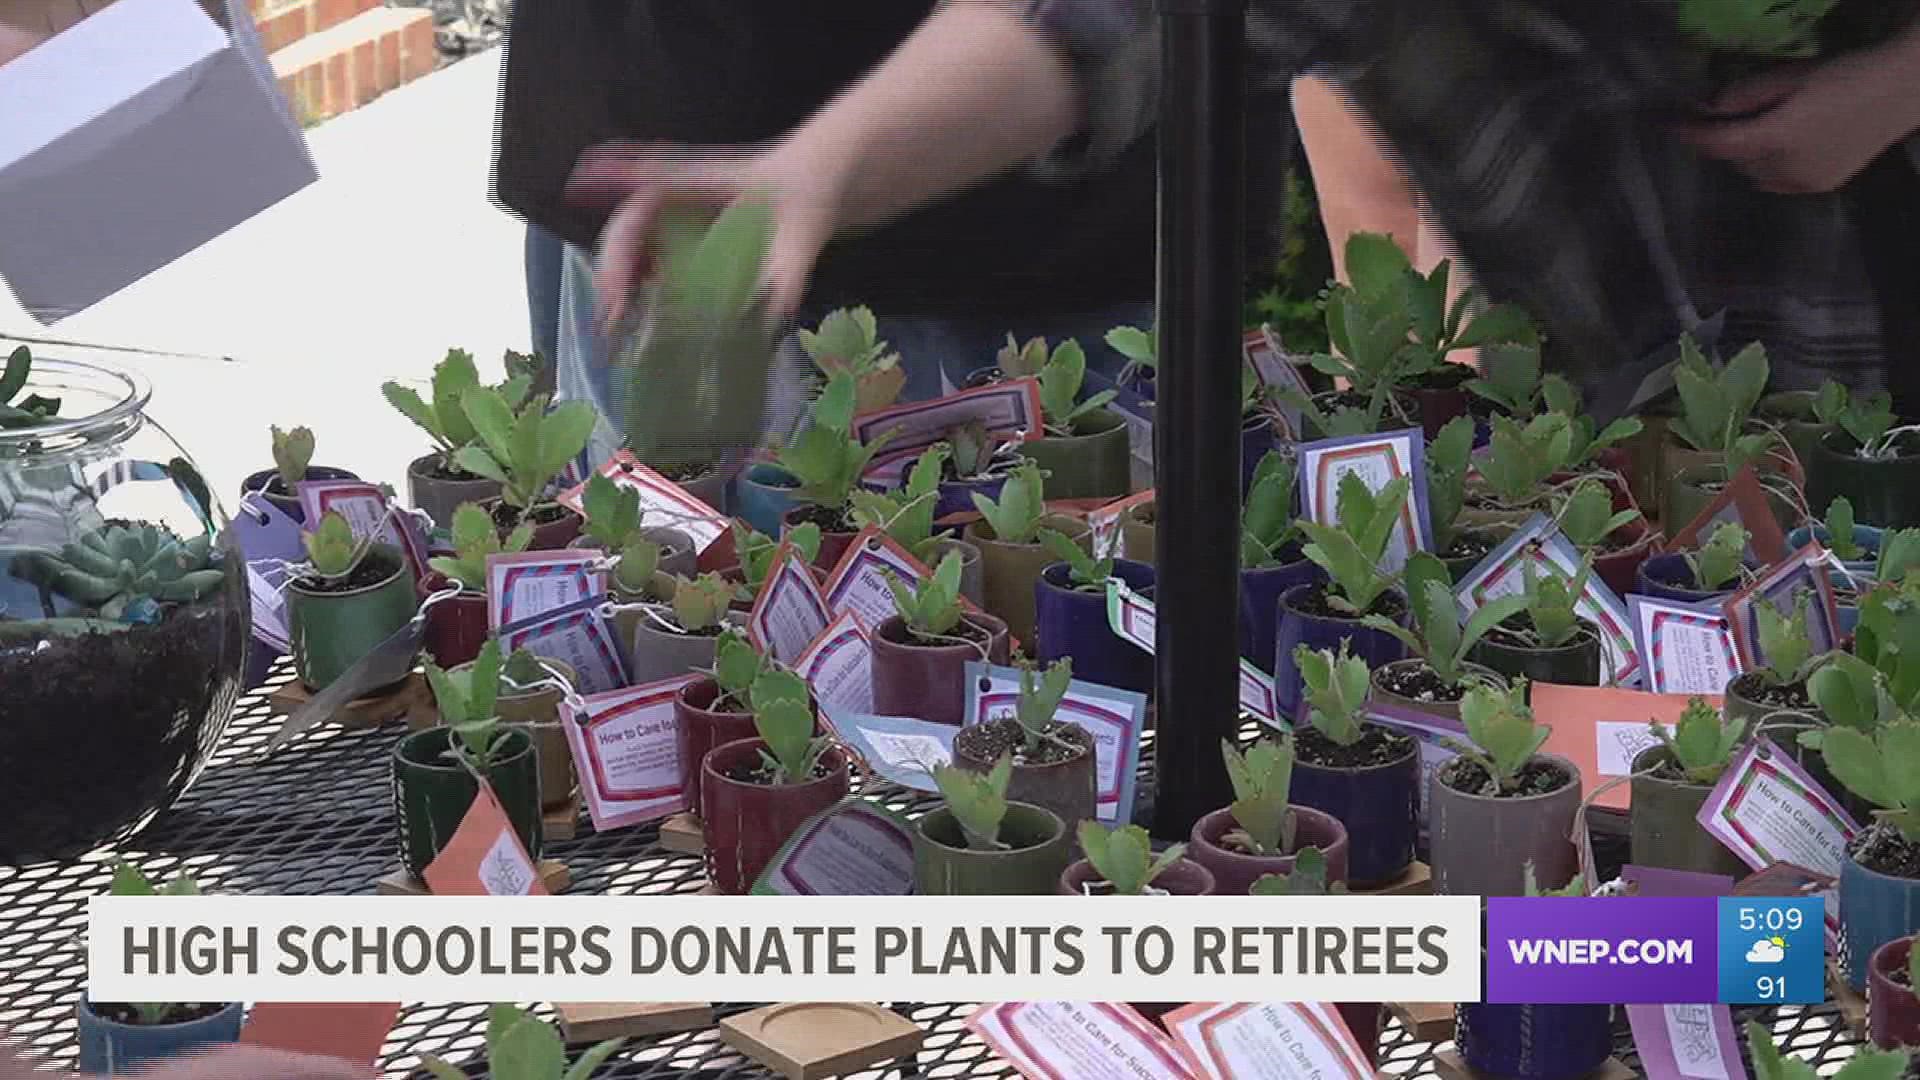 After dedicating a school year to raising succulents, the 4-H students at Blue Mountain High School are gifting the plants to a special group of residents.